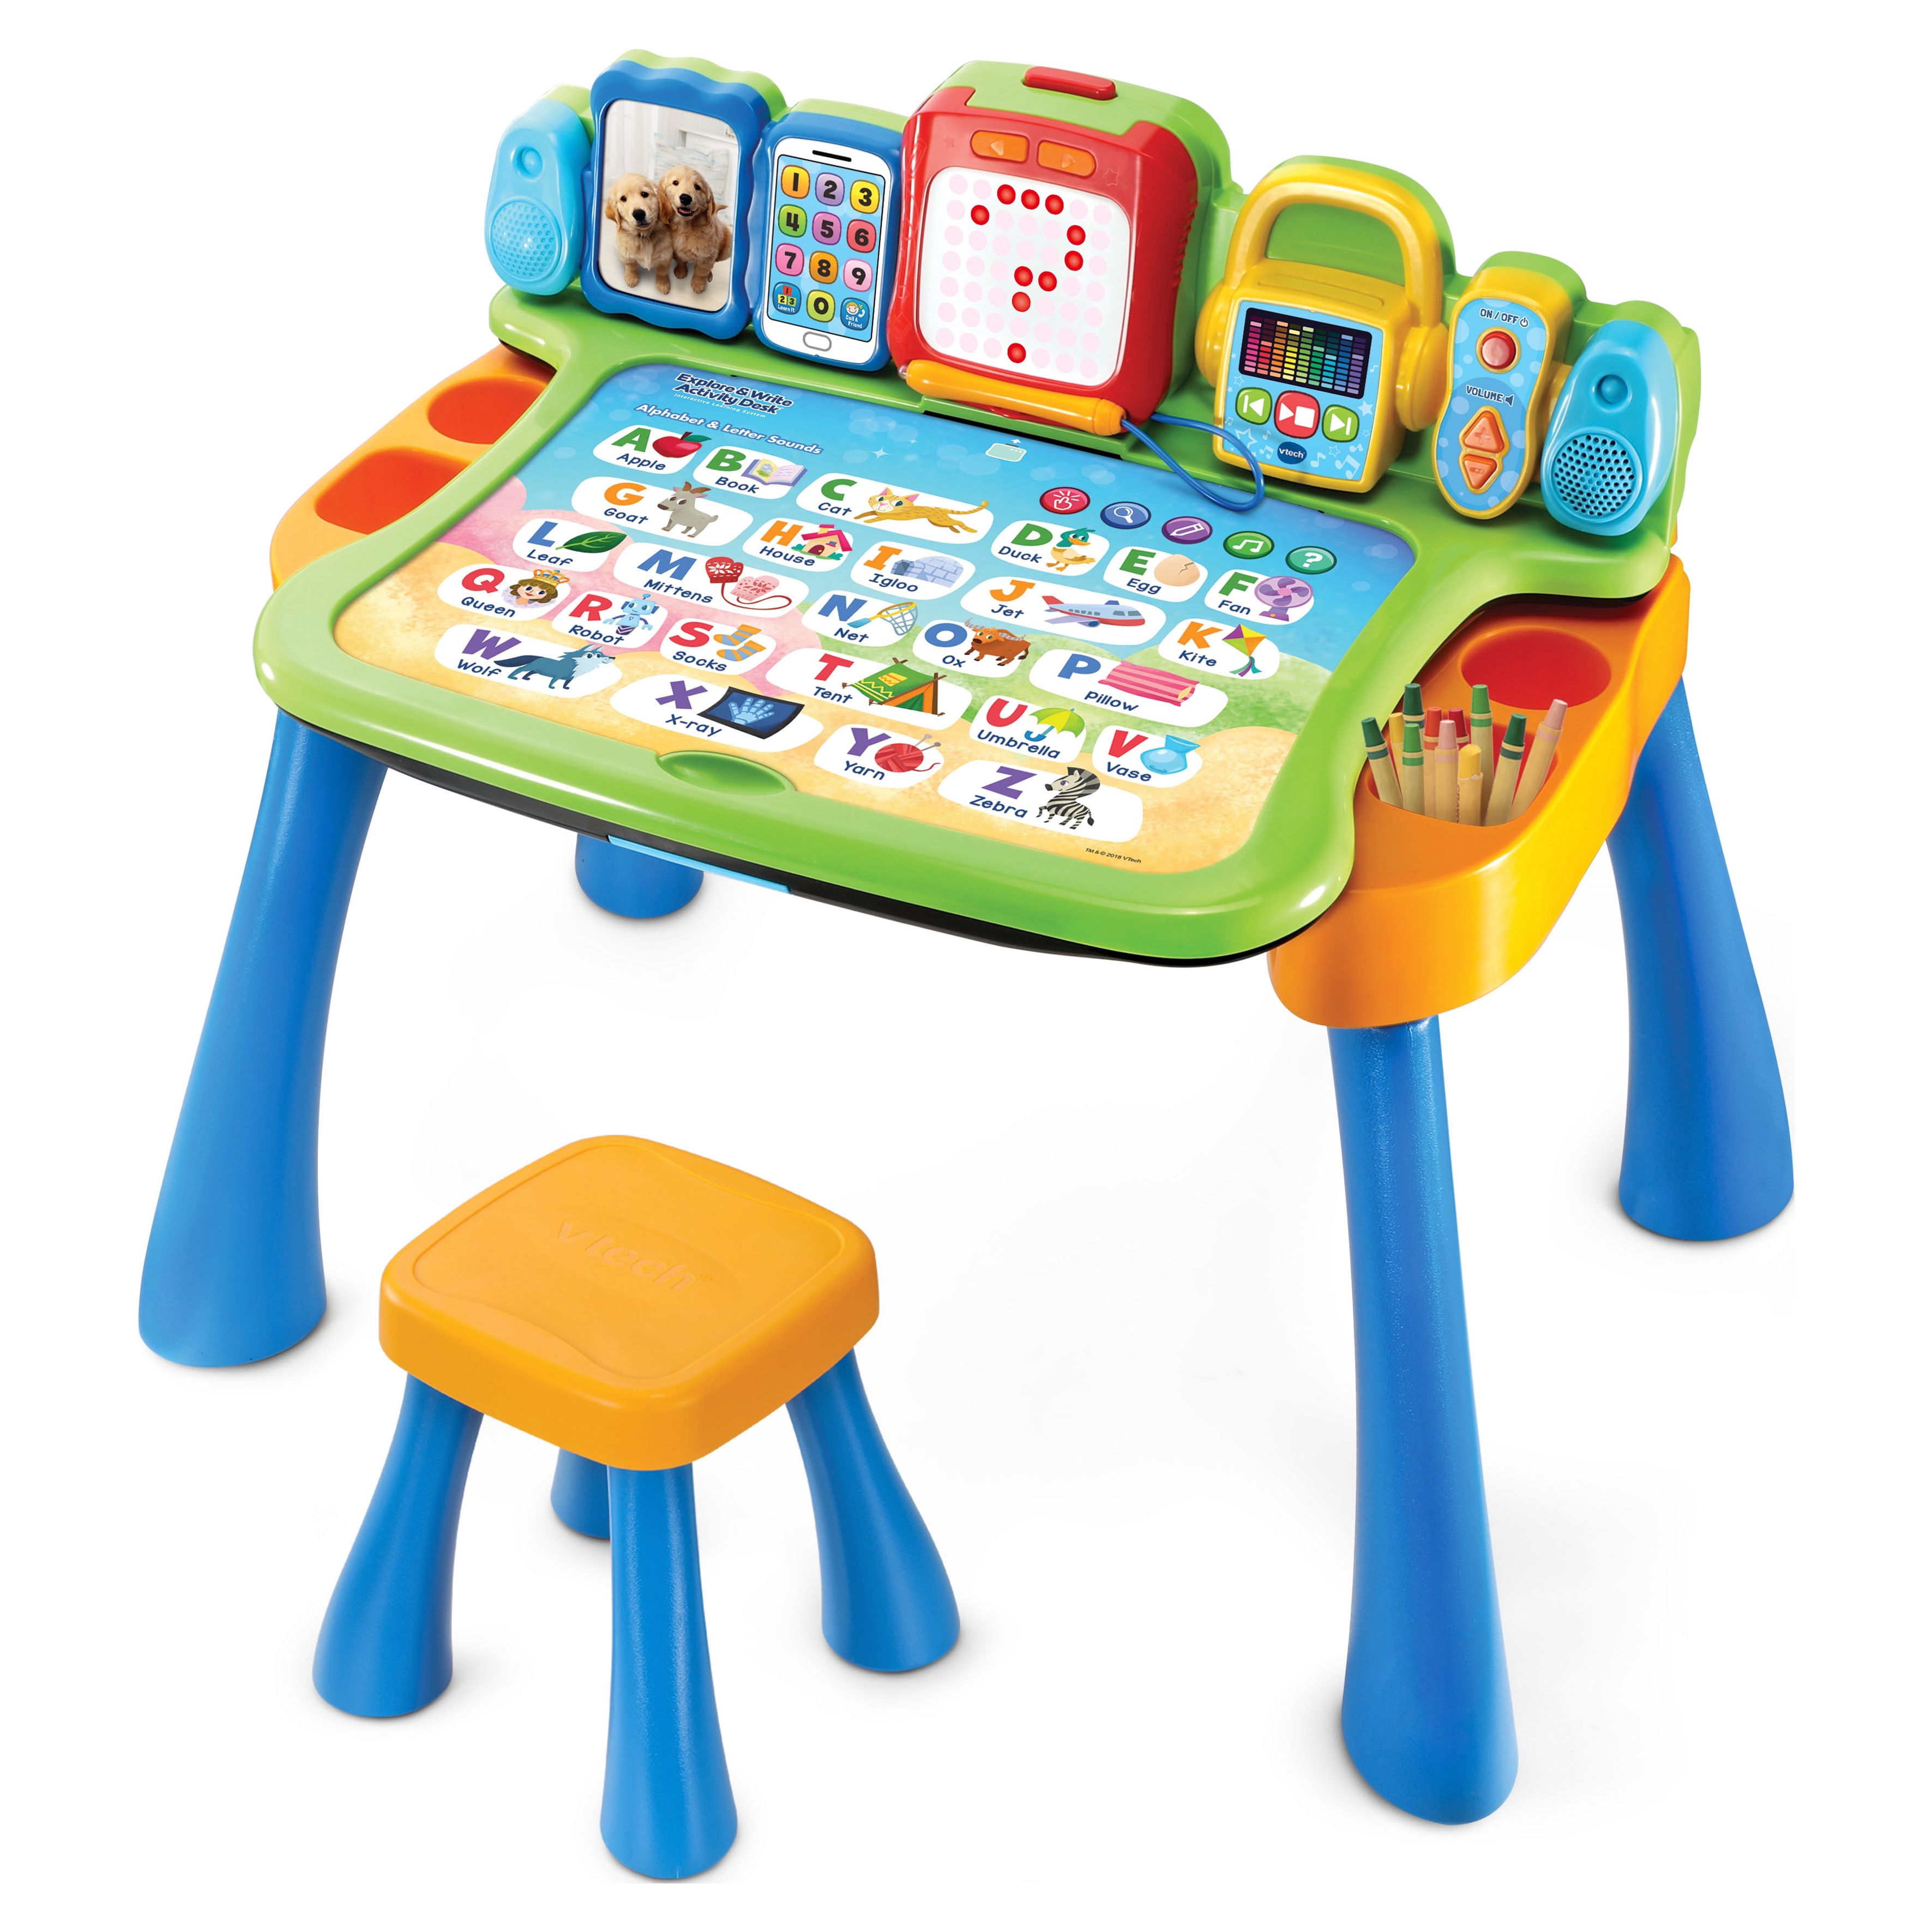 Vtech Explore And Write Activity Desk - image 1 of 12